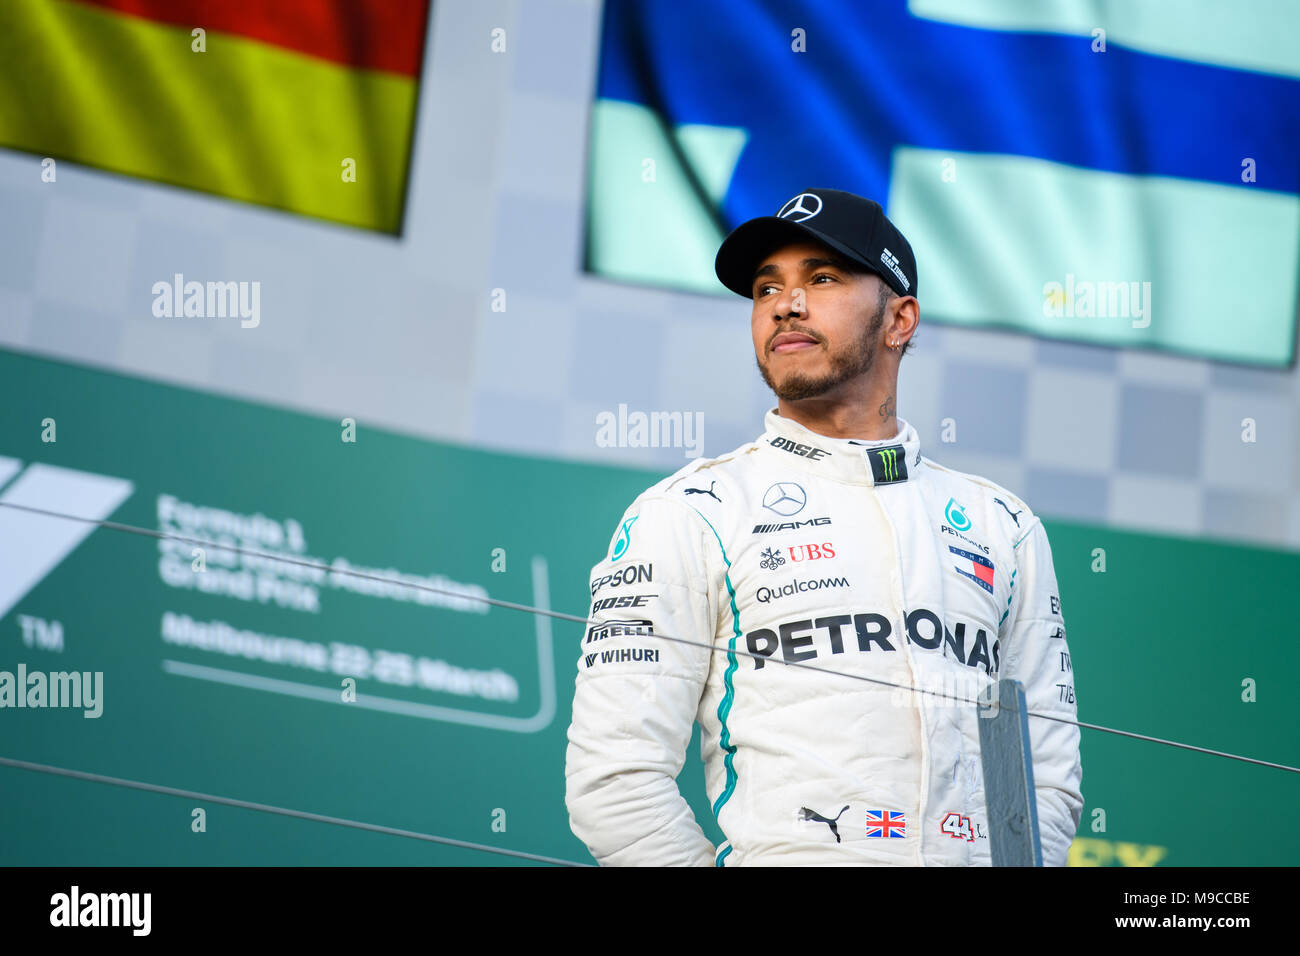 Albert Park, Melbourne, Australia. 25th Mar, 2018. Lewis Hamilton (GBR) #44 from the Mercedes AMG Petronas Motorsport team waits for an interview. He came second in the 2018 Australian Formula One Grand Prix at Albert Park, Melbourne, Australia. Sydney Low/Cal Sport Media/Alamy Live News Stock Photo